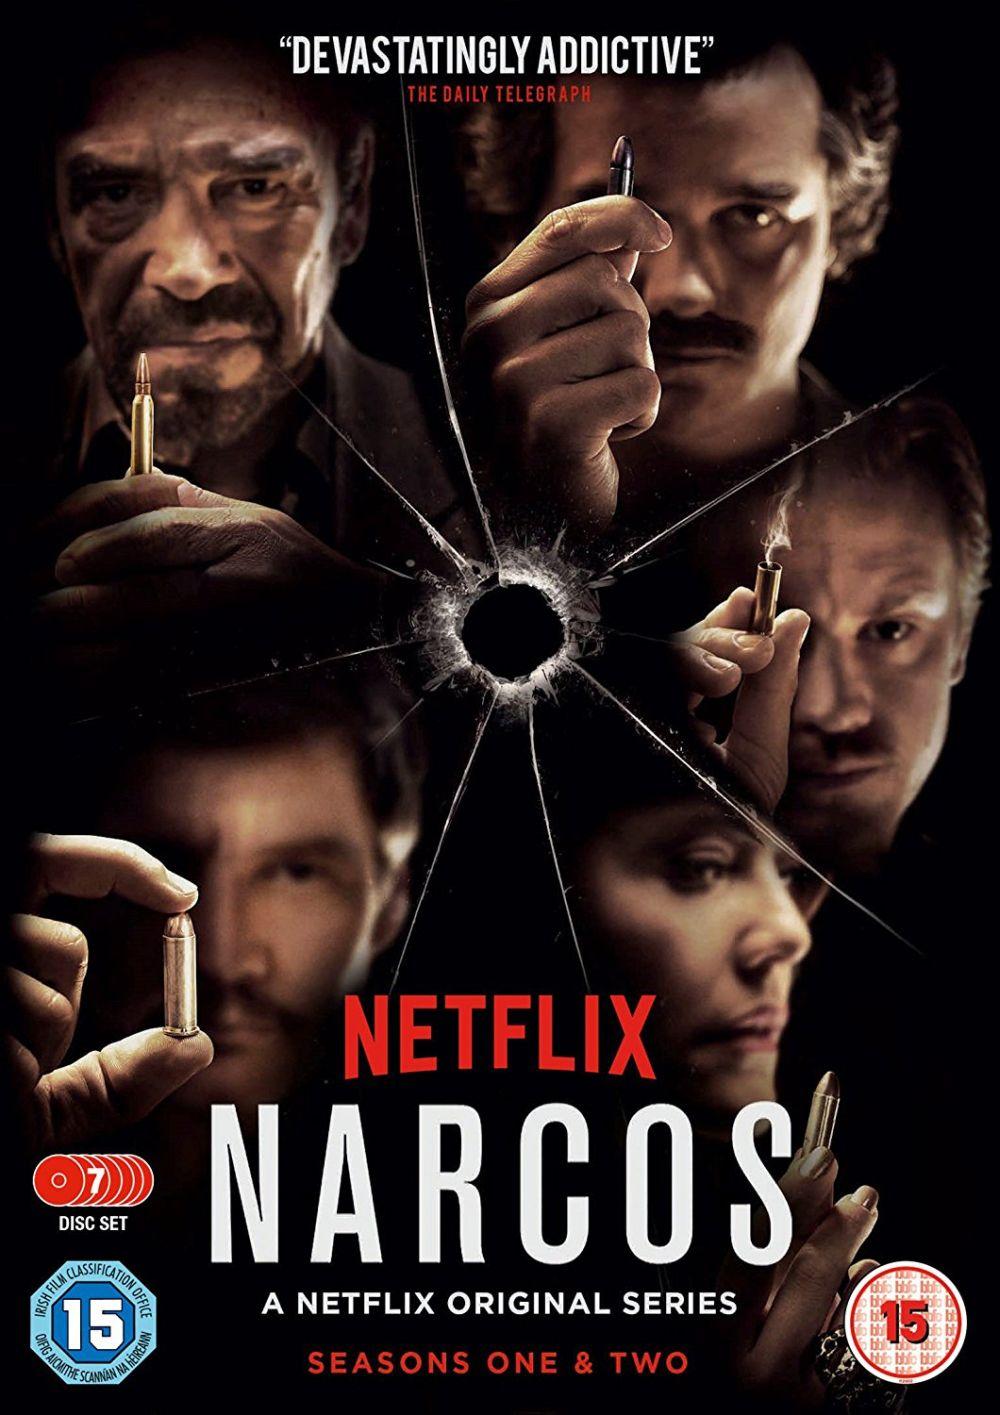 NARCOS: THE COMPLETE SEASONS ONE AND TWO (2016) 7DVD